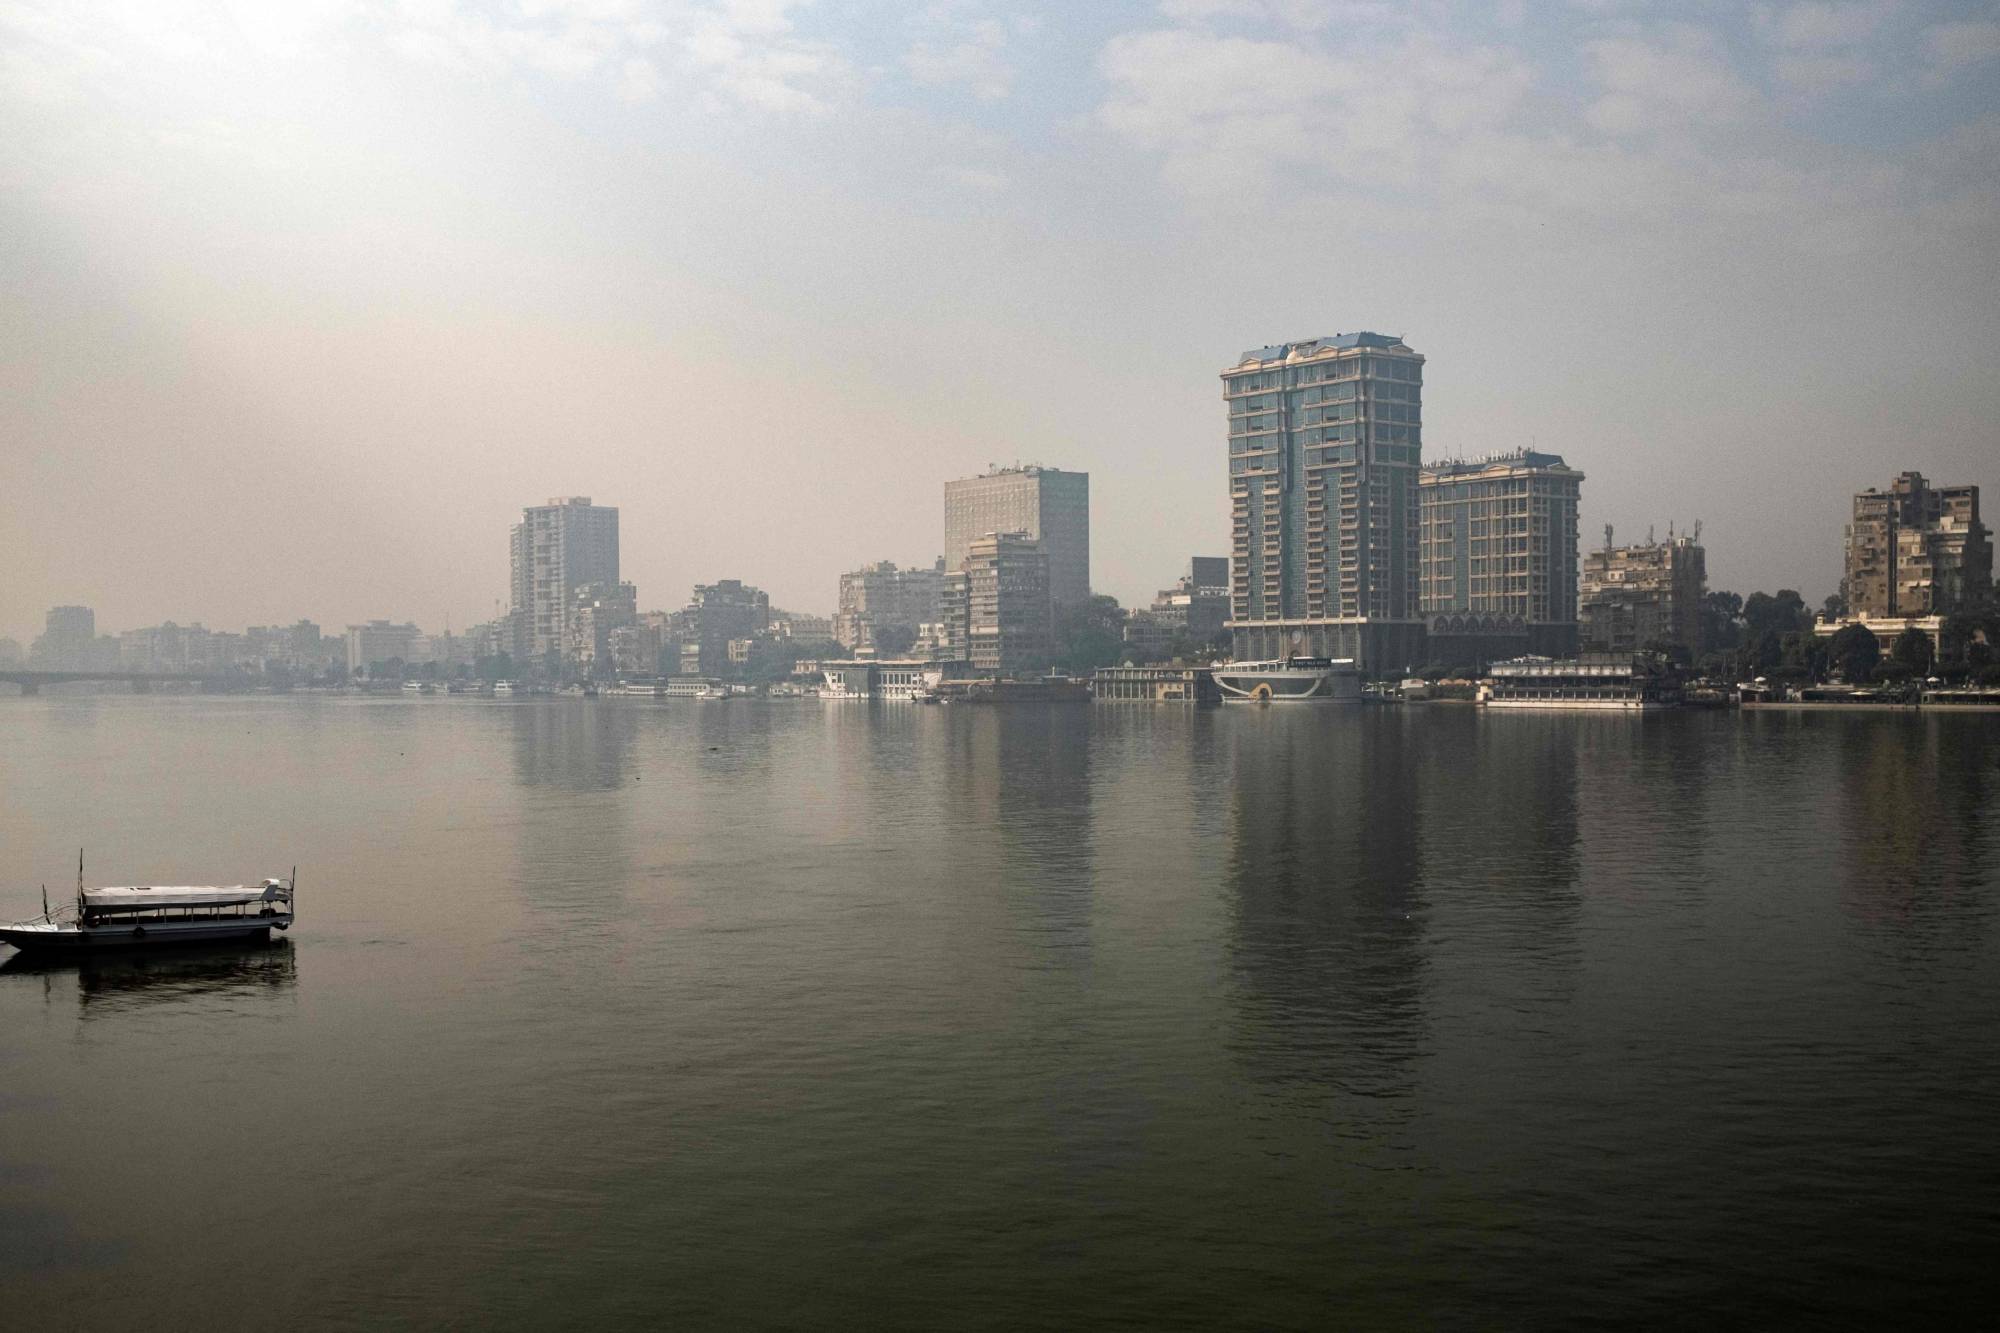 The Nile river embakment in Giza, the twin city to Egypt's capital, Cairo, on Tuesday. | AFP-JIJI